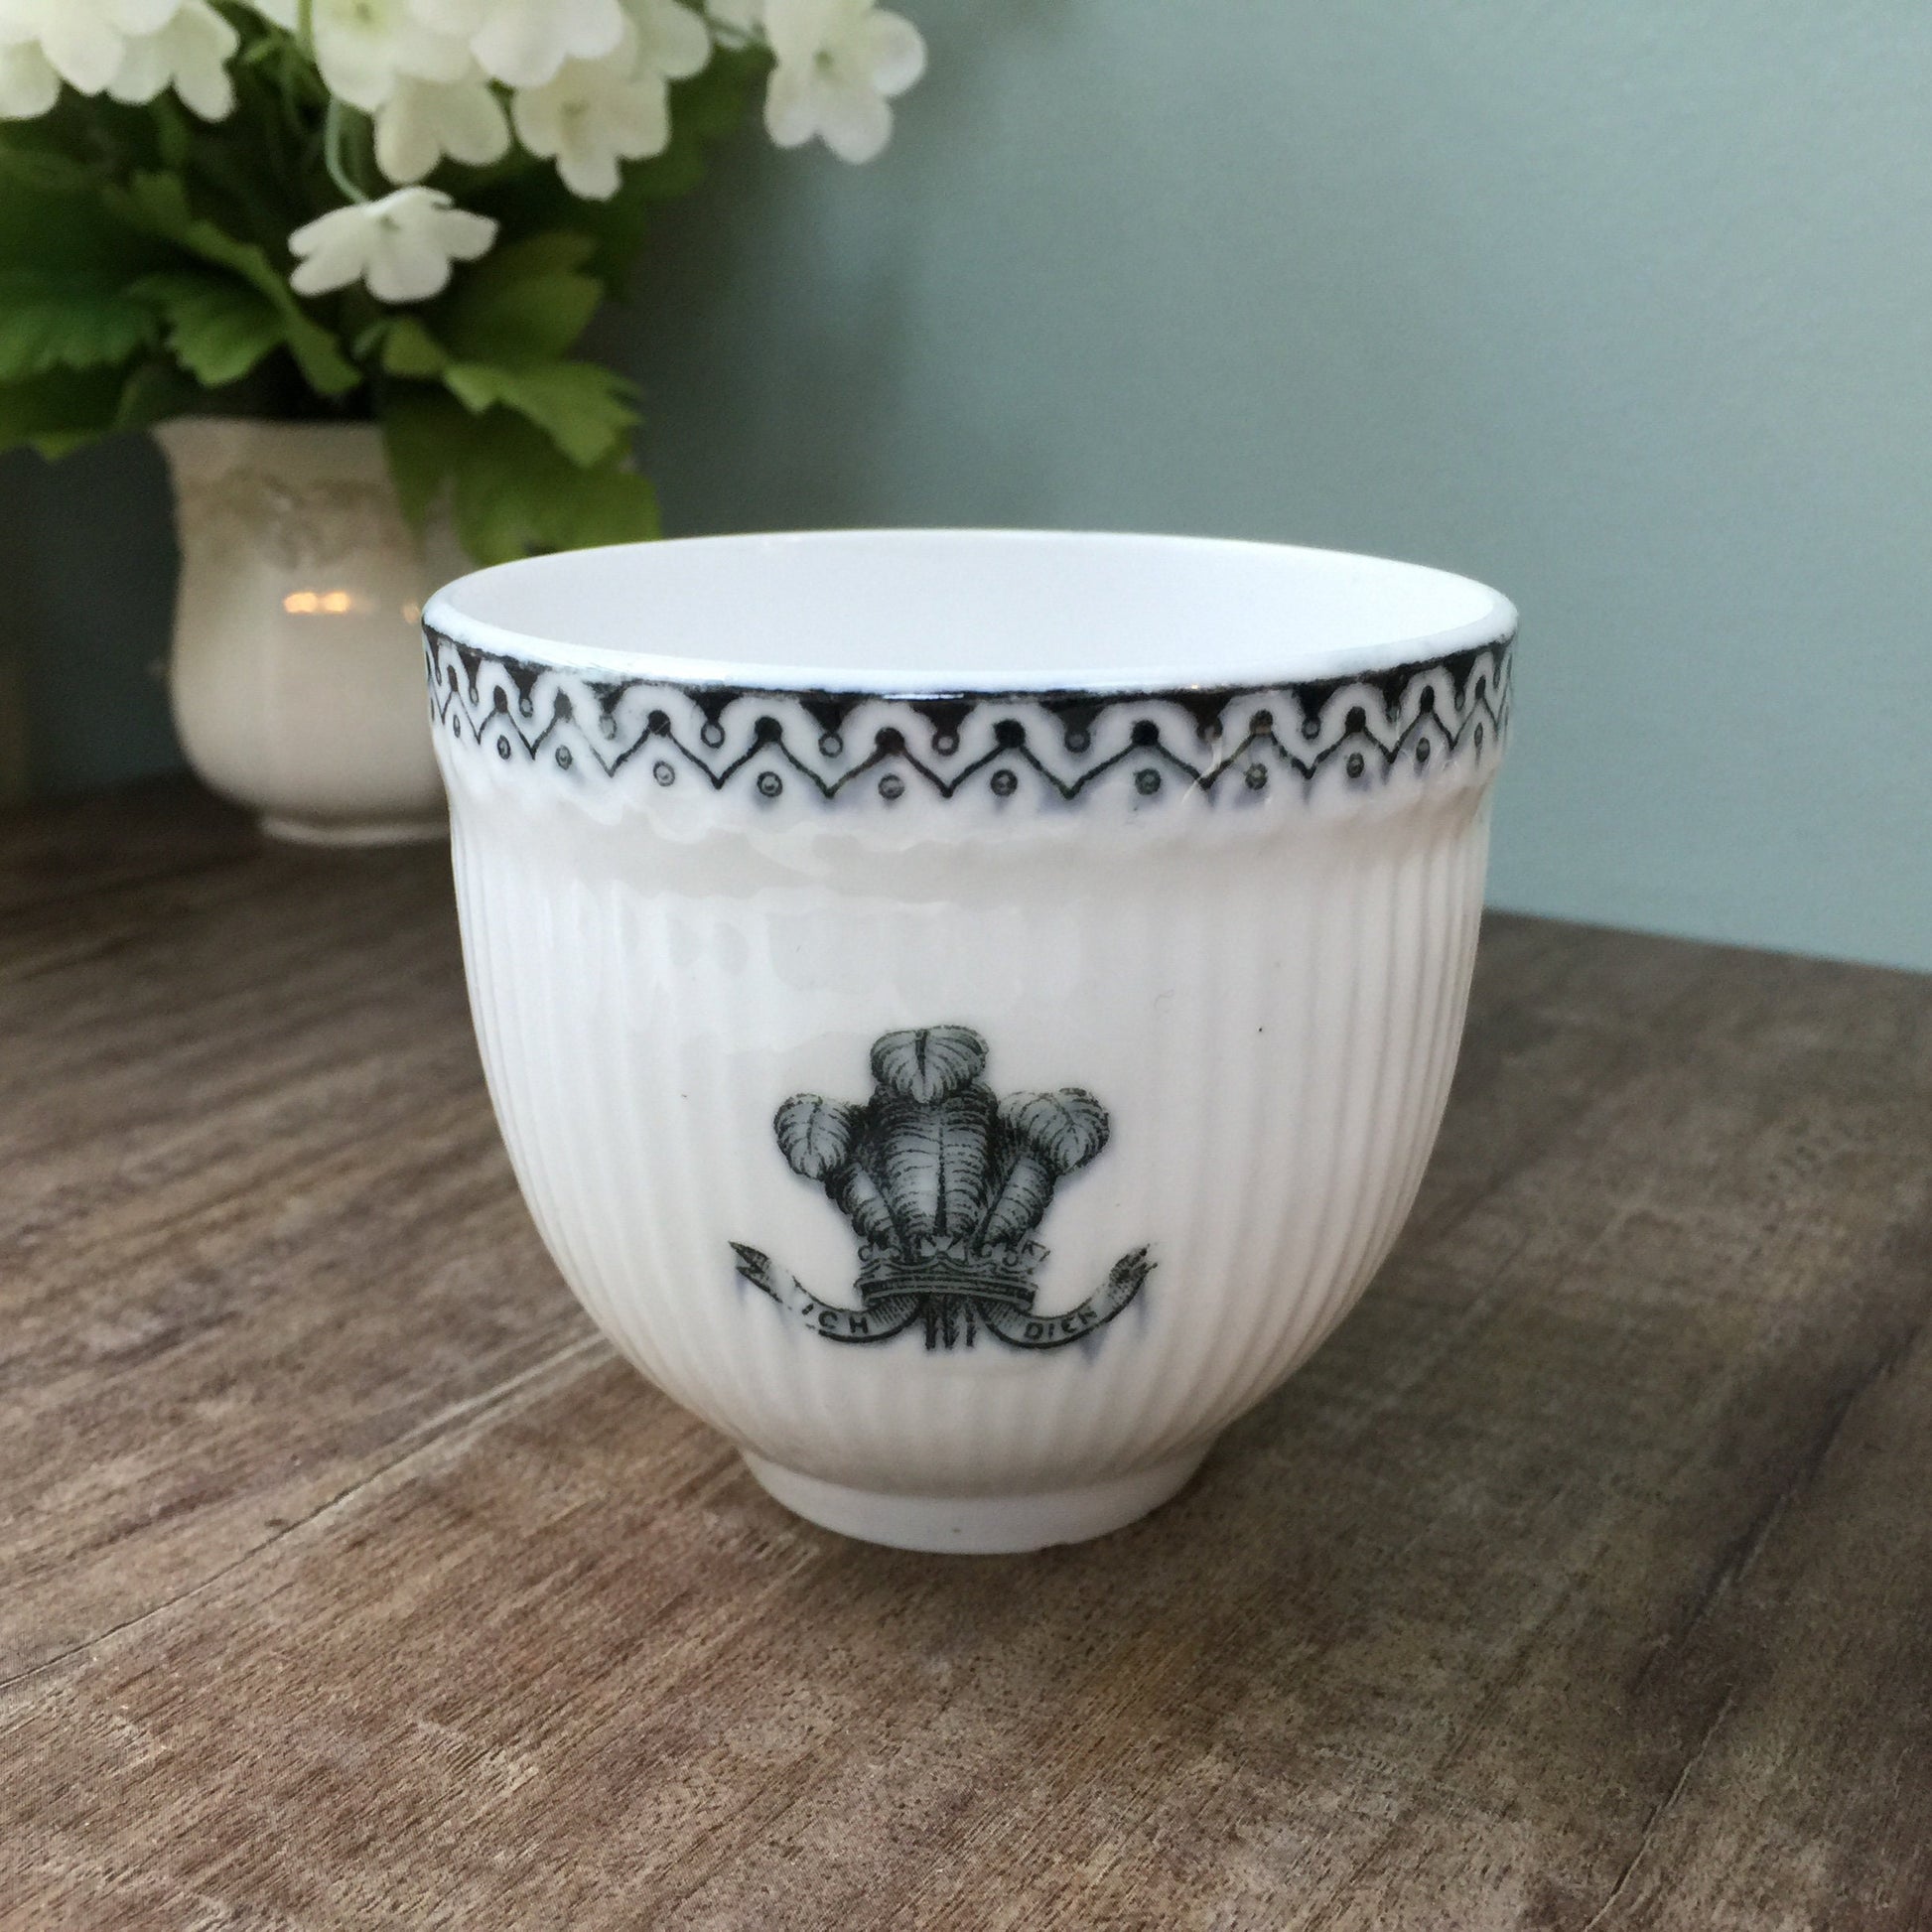 Antique English Royalty Cup, Prince and Princess - Duckwells